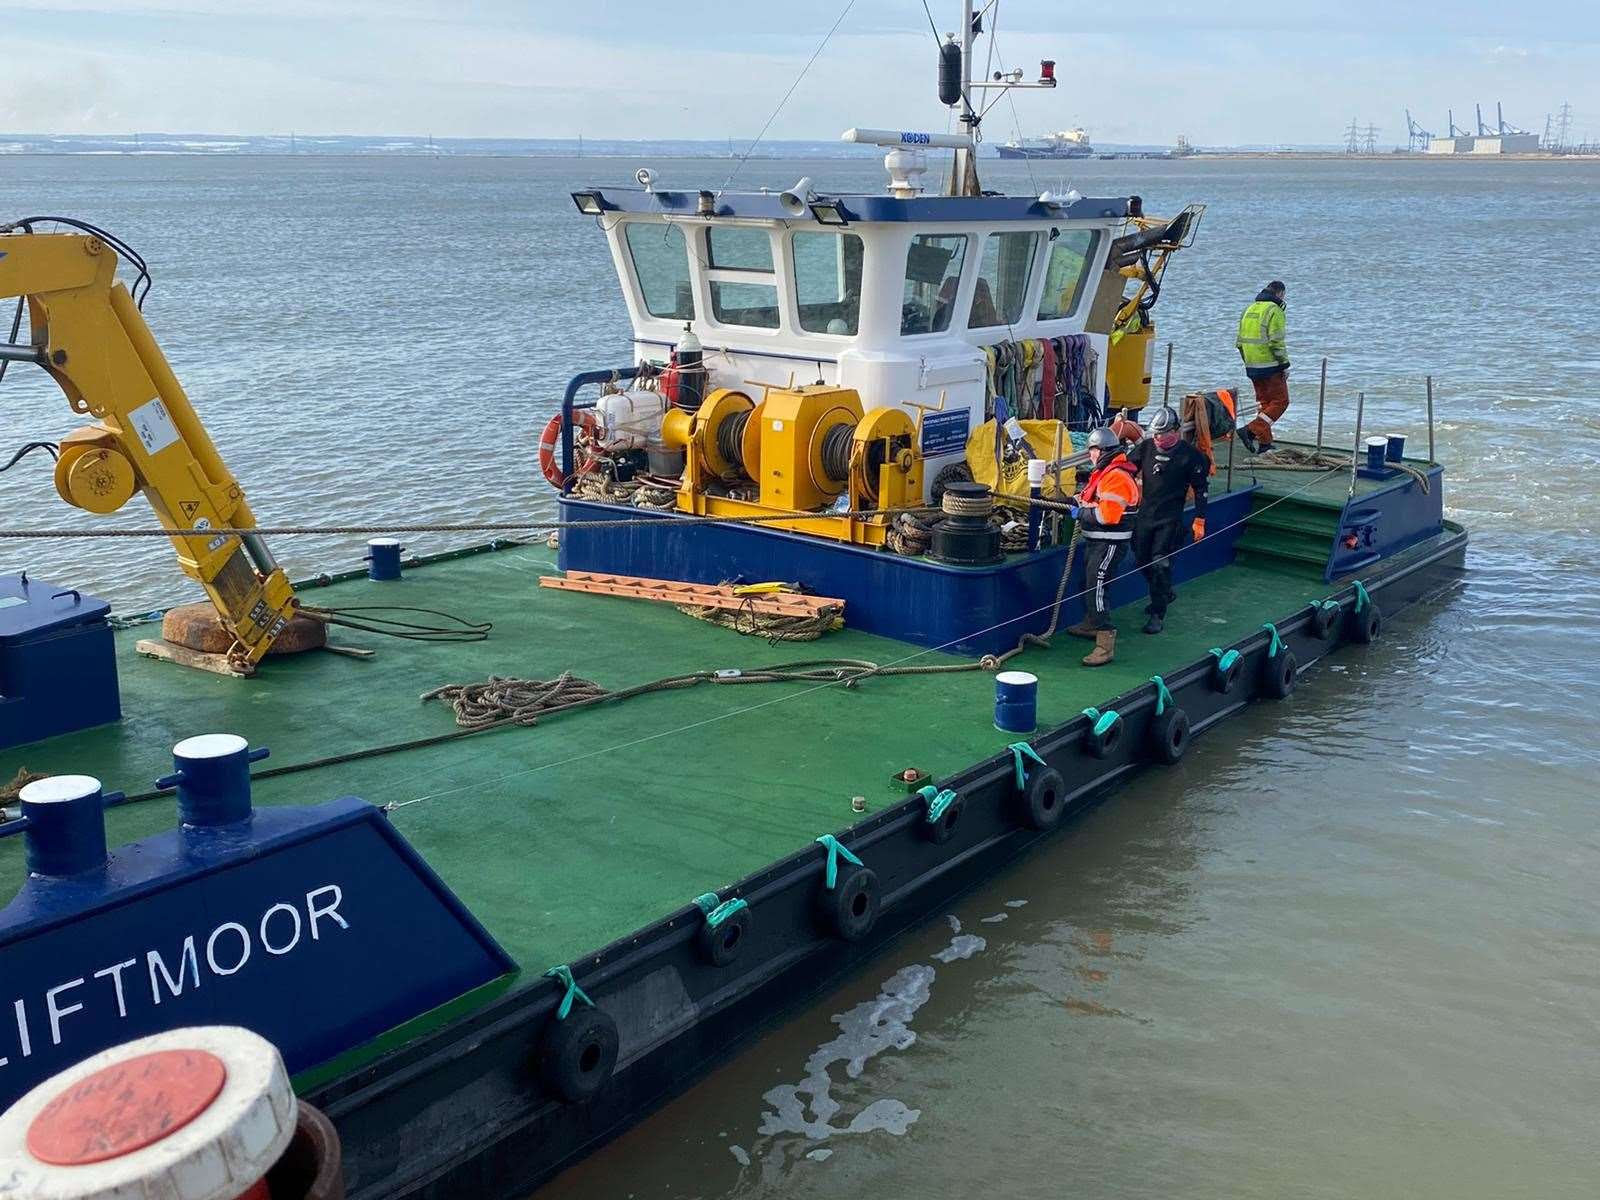 The sunk Gypsy Lea fishing boat being lifted by the Whitstable Marine Services' £1.9m Liftmoor floating crane. Picture: Whitstable Marine Services